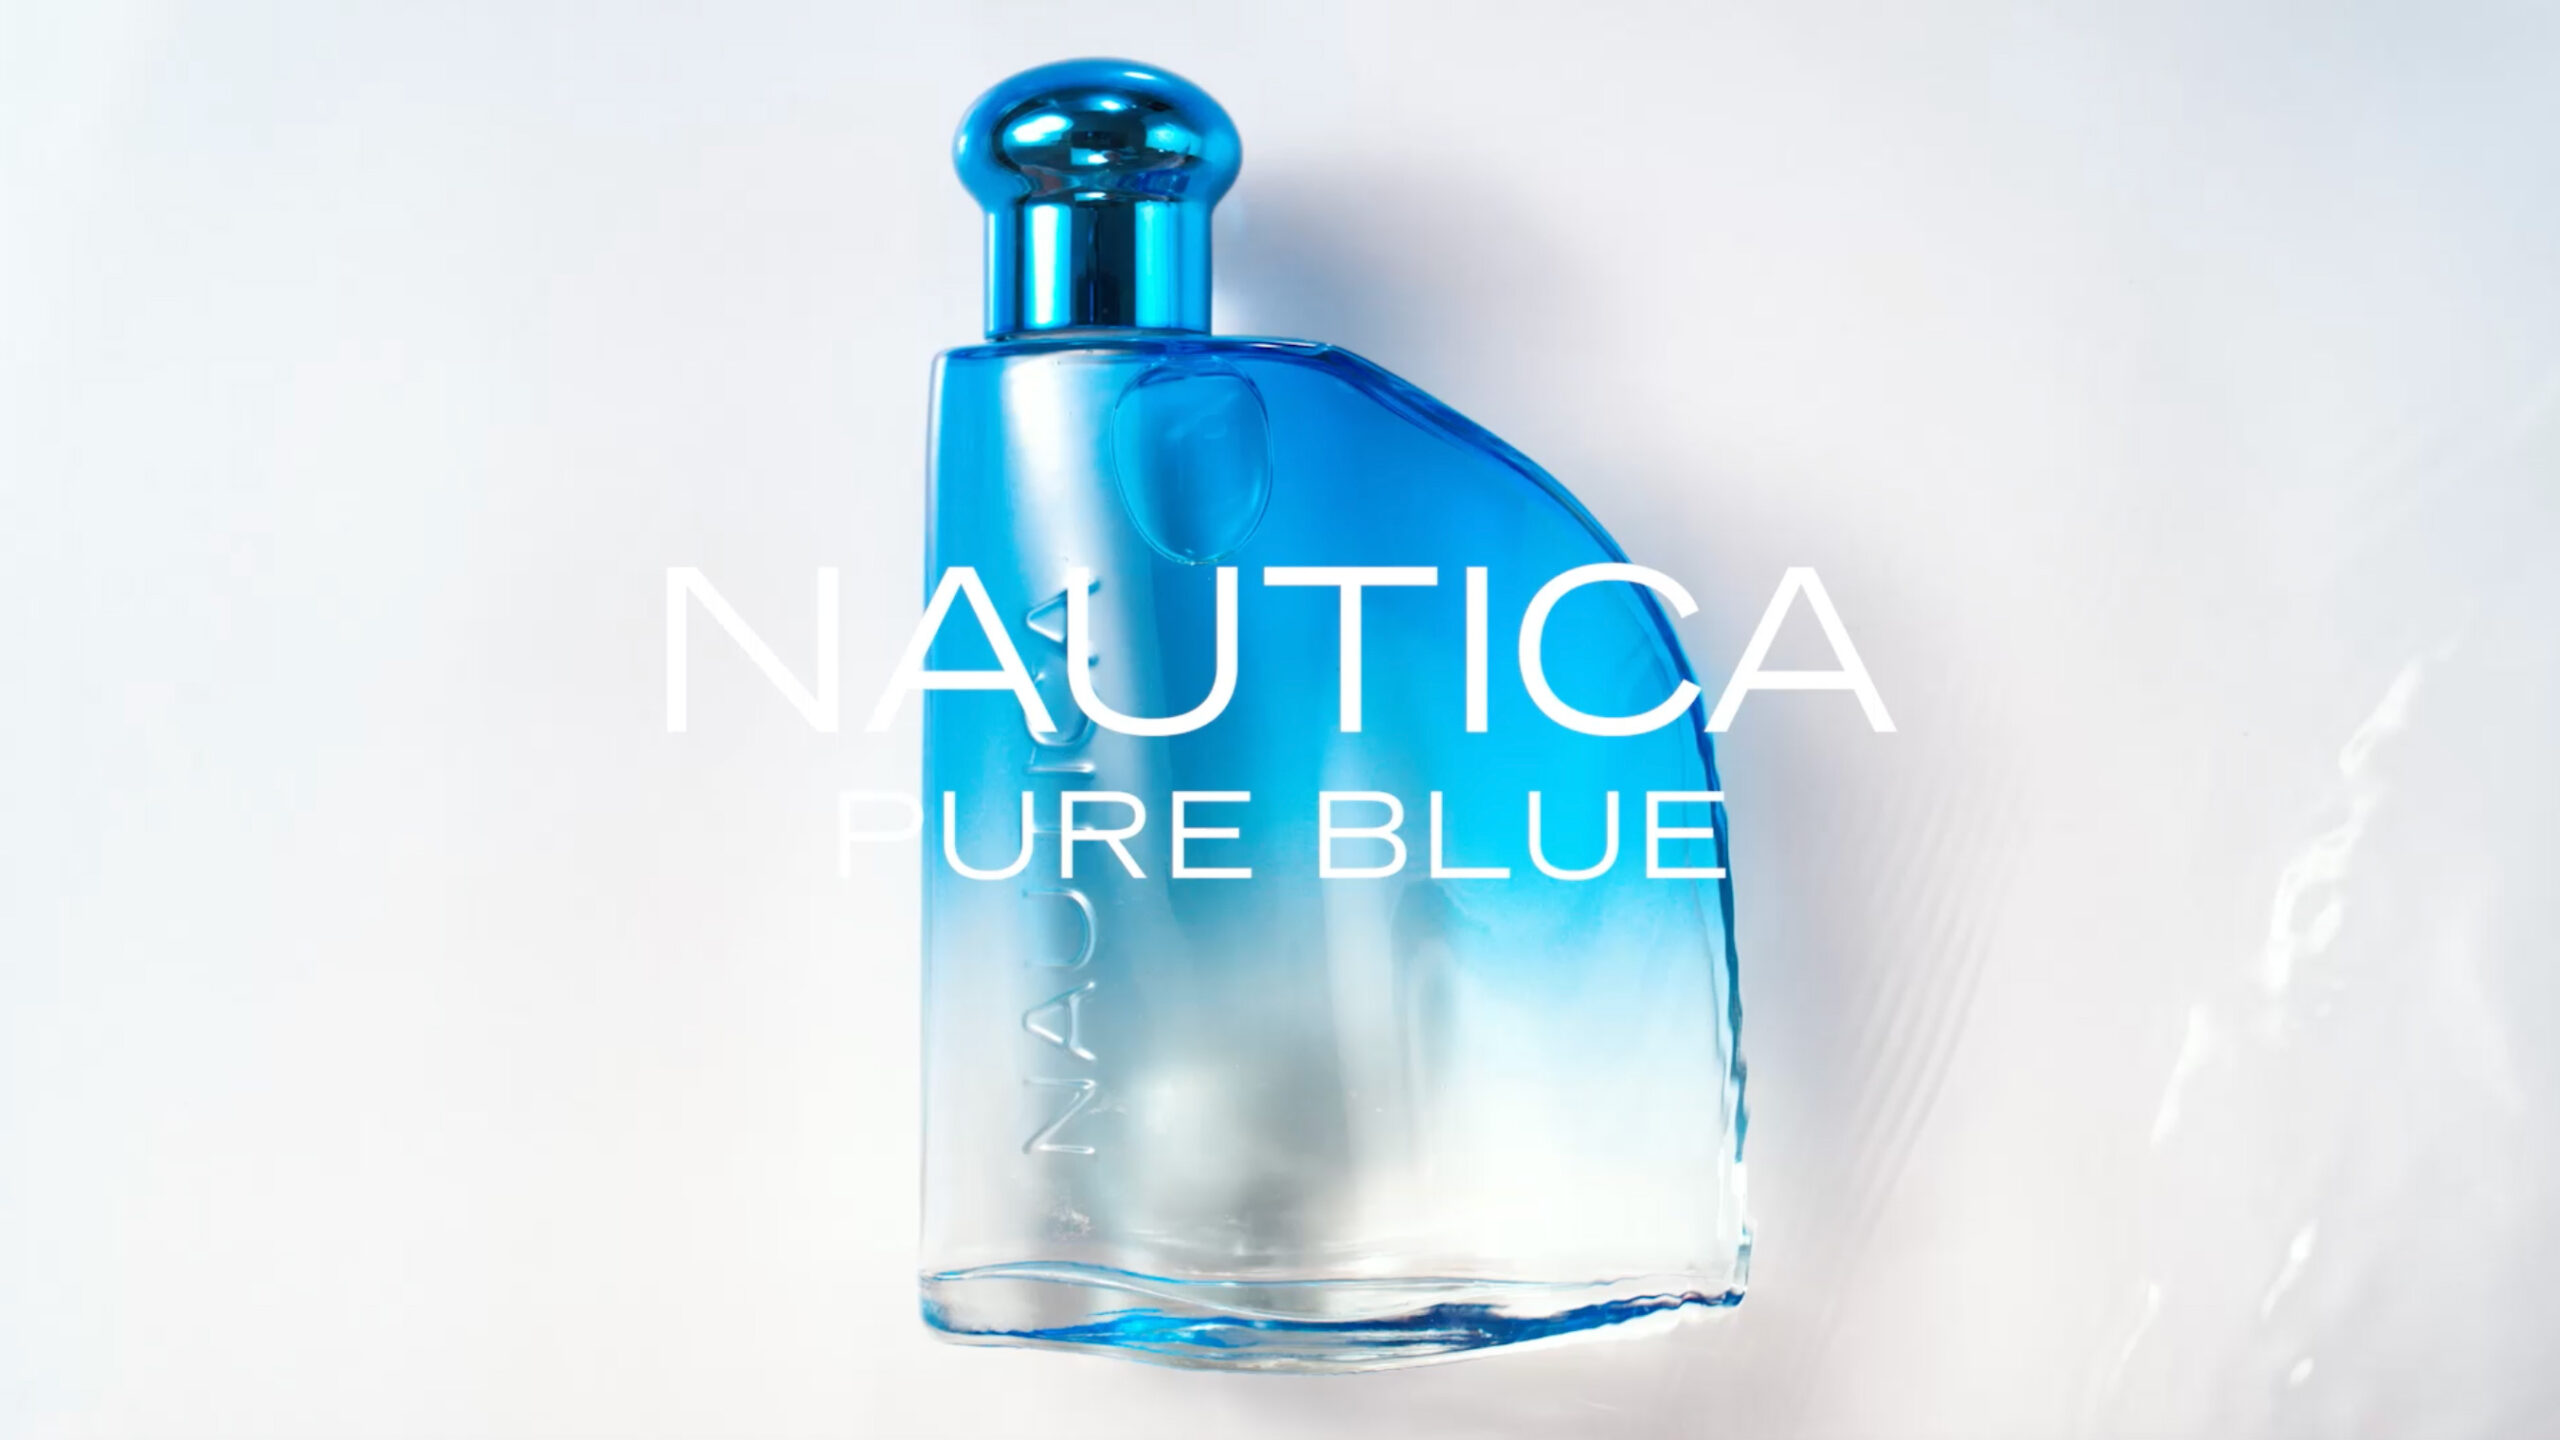 Nautica Pure Blue by Dylan Griffin – Art Department